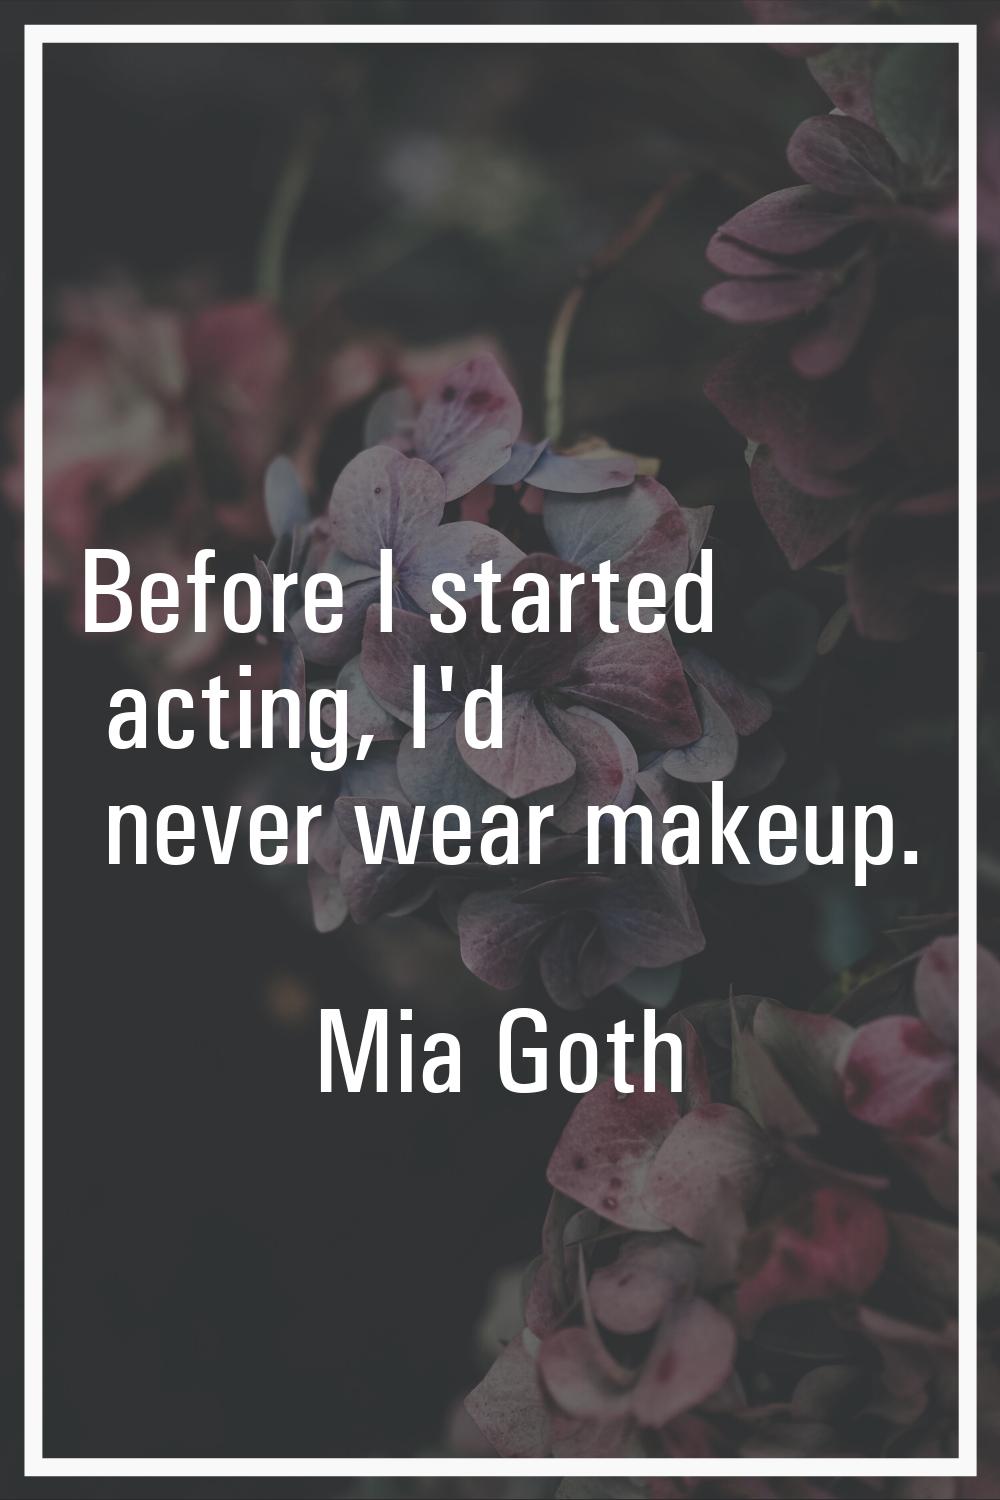 Before I started acting, I'd never wear makeup.